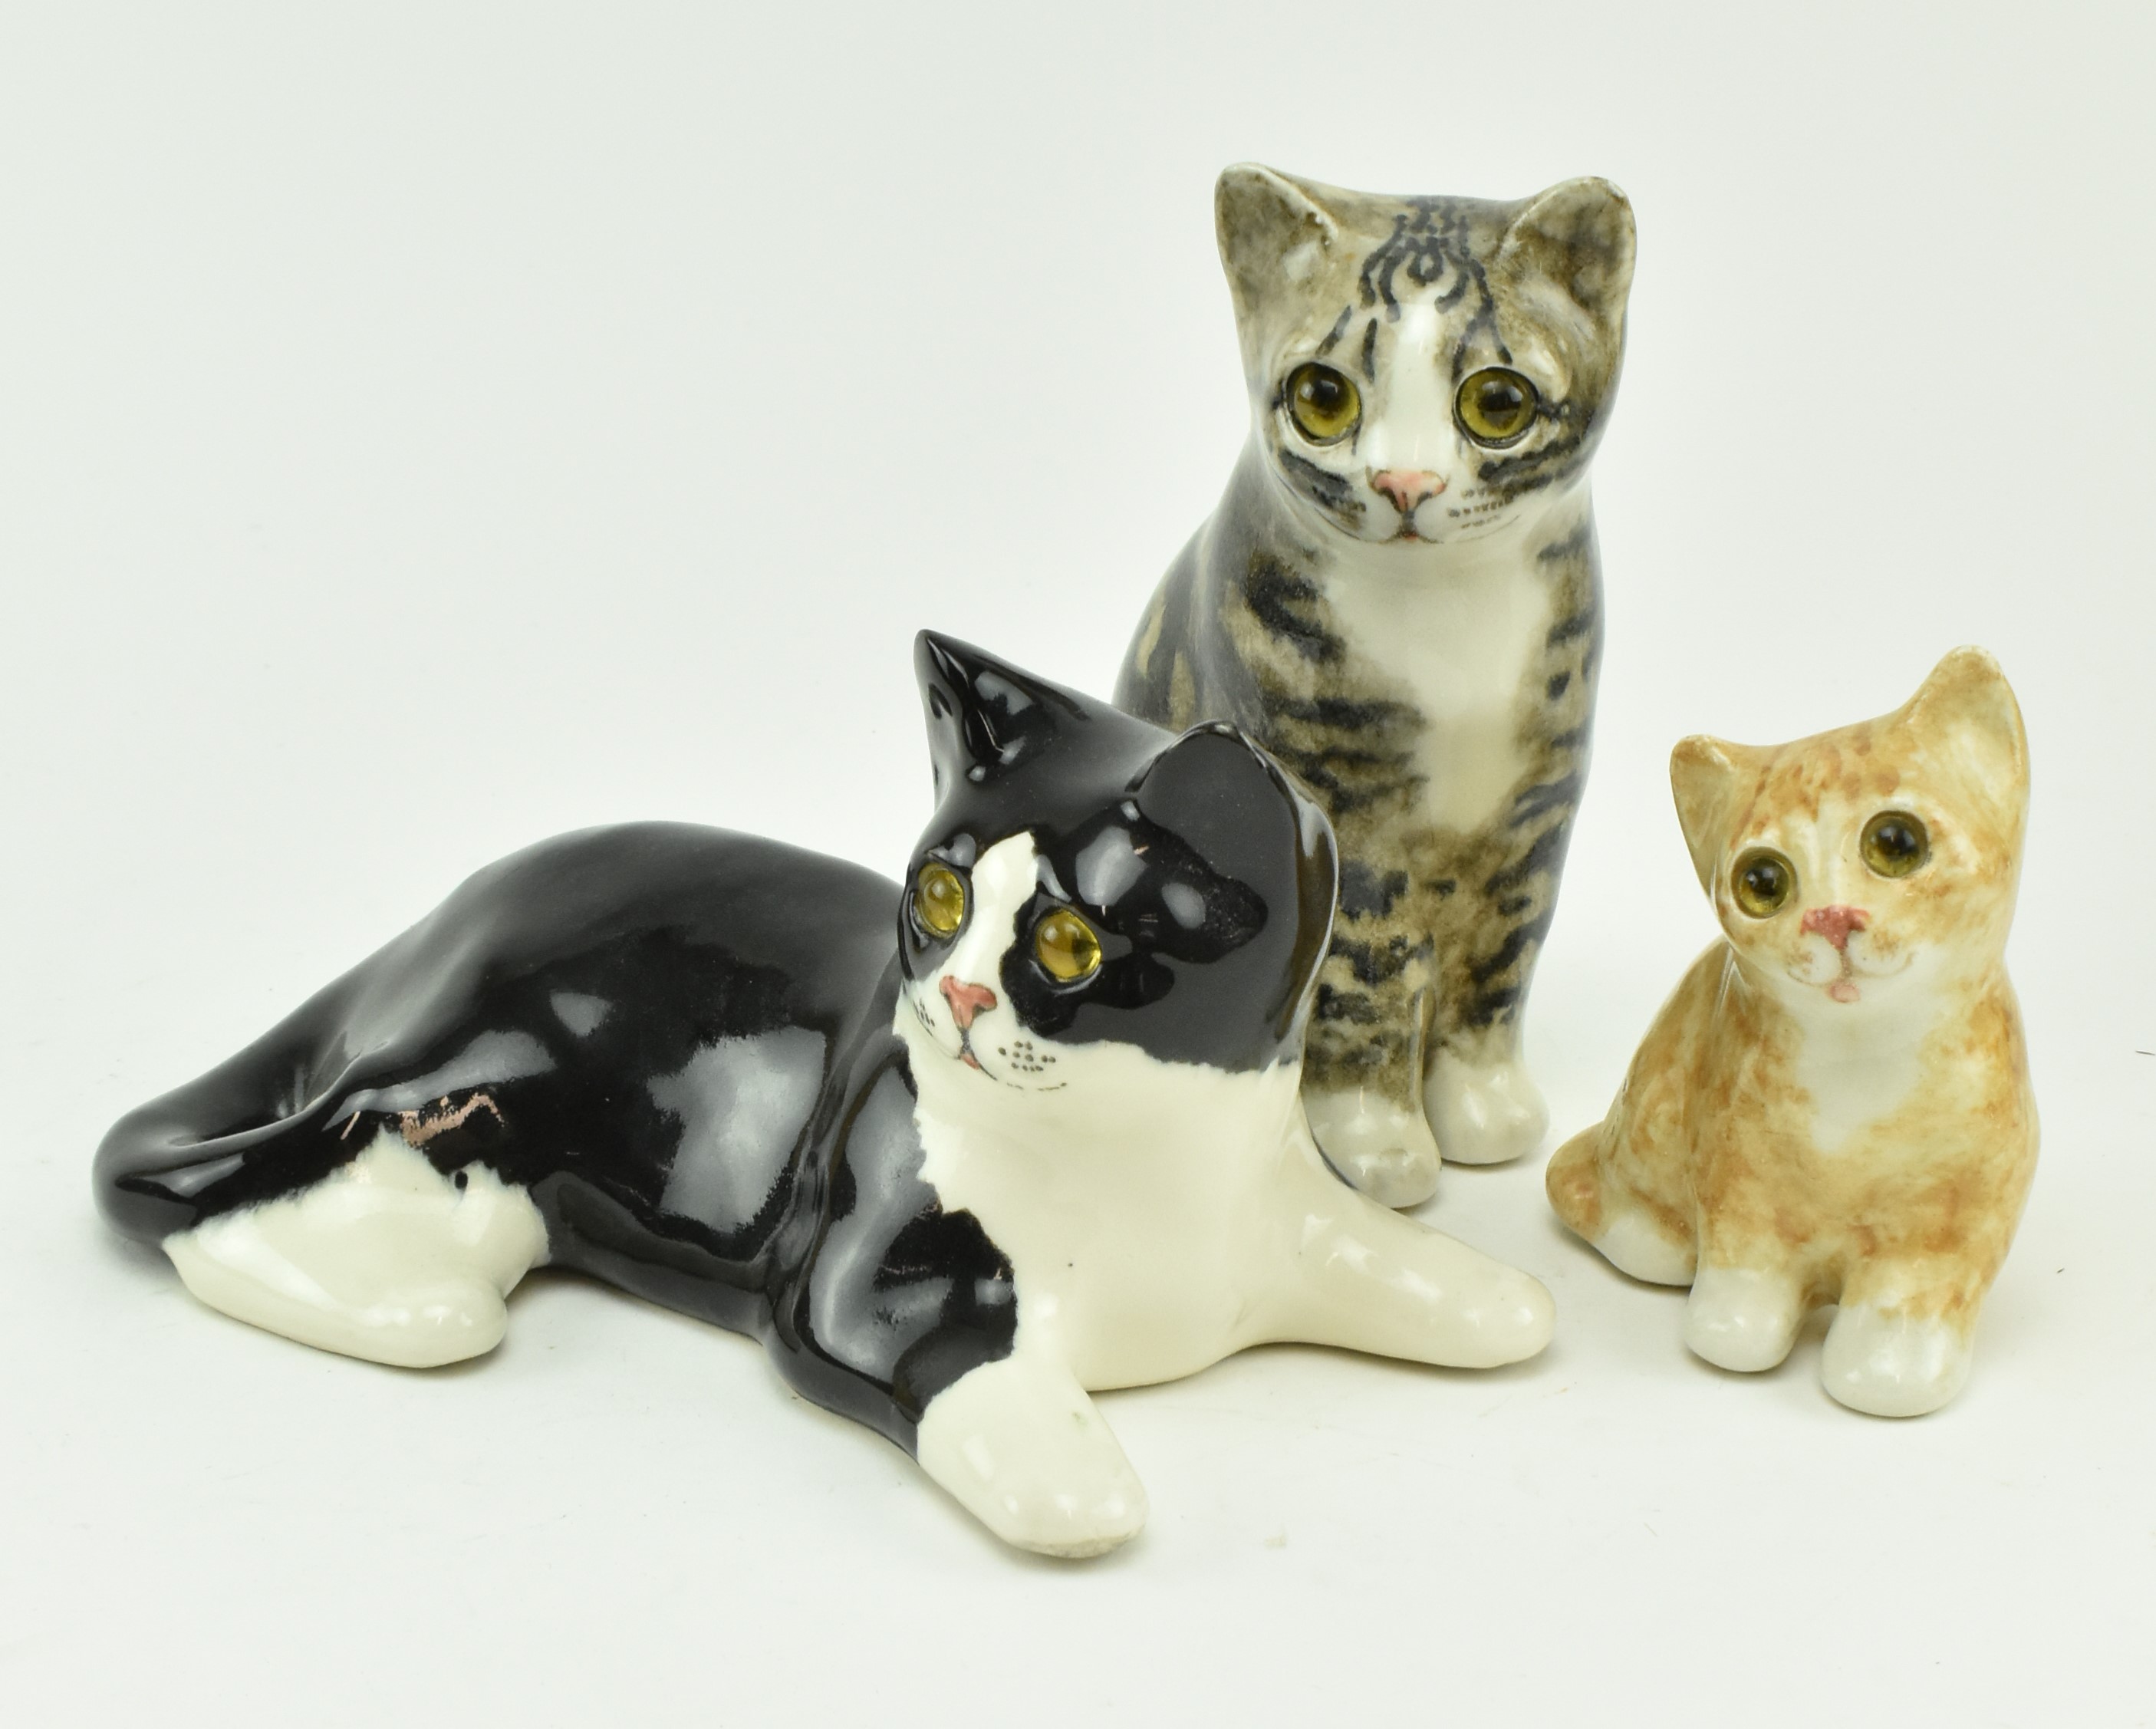 FIVE WINSTANLEY CERAMIC CATS WITH GLASS EYES - Image 6 of 10